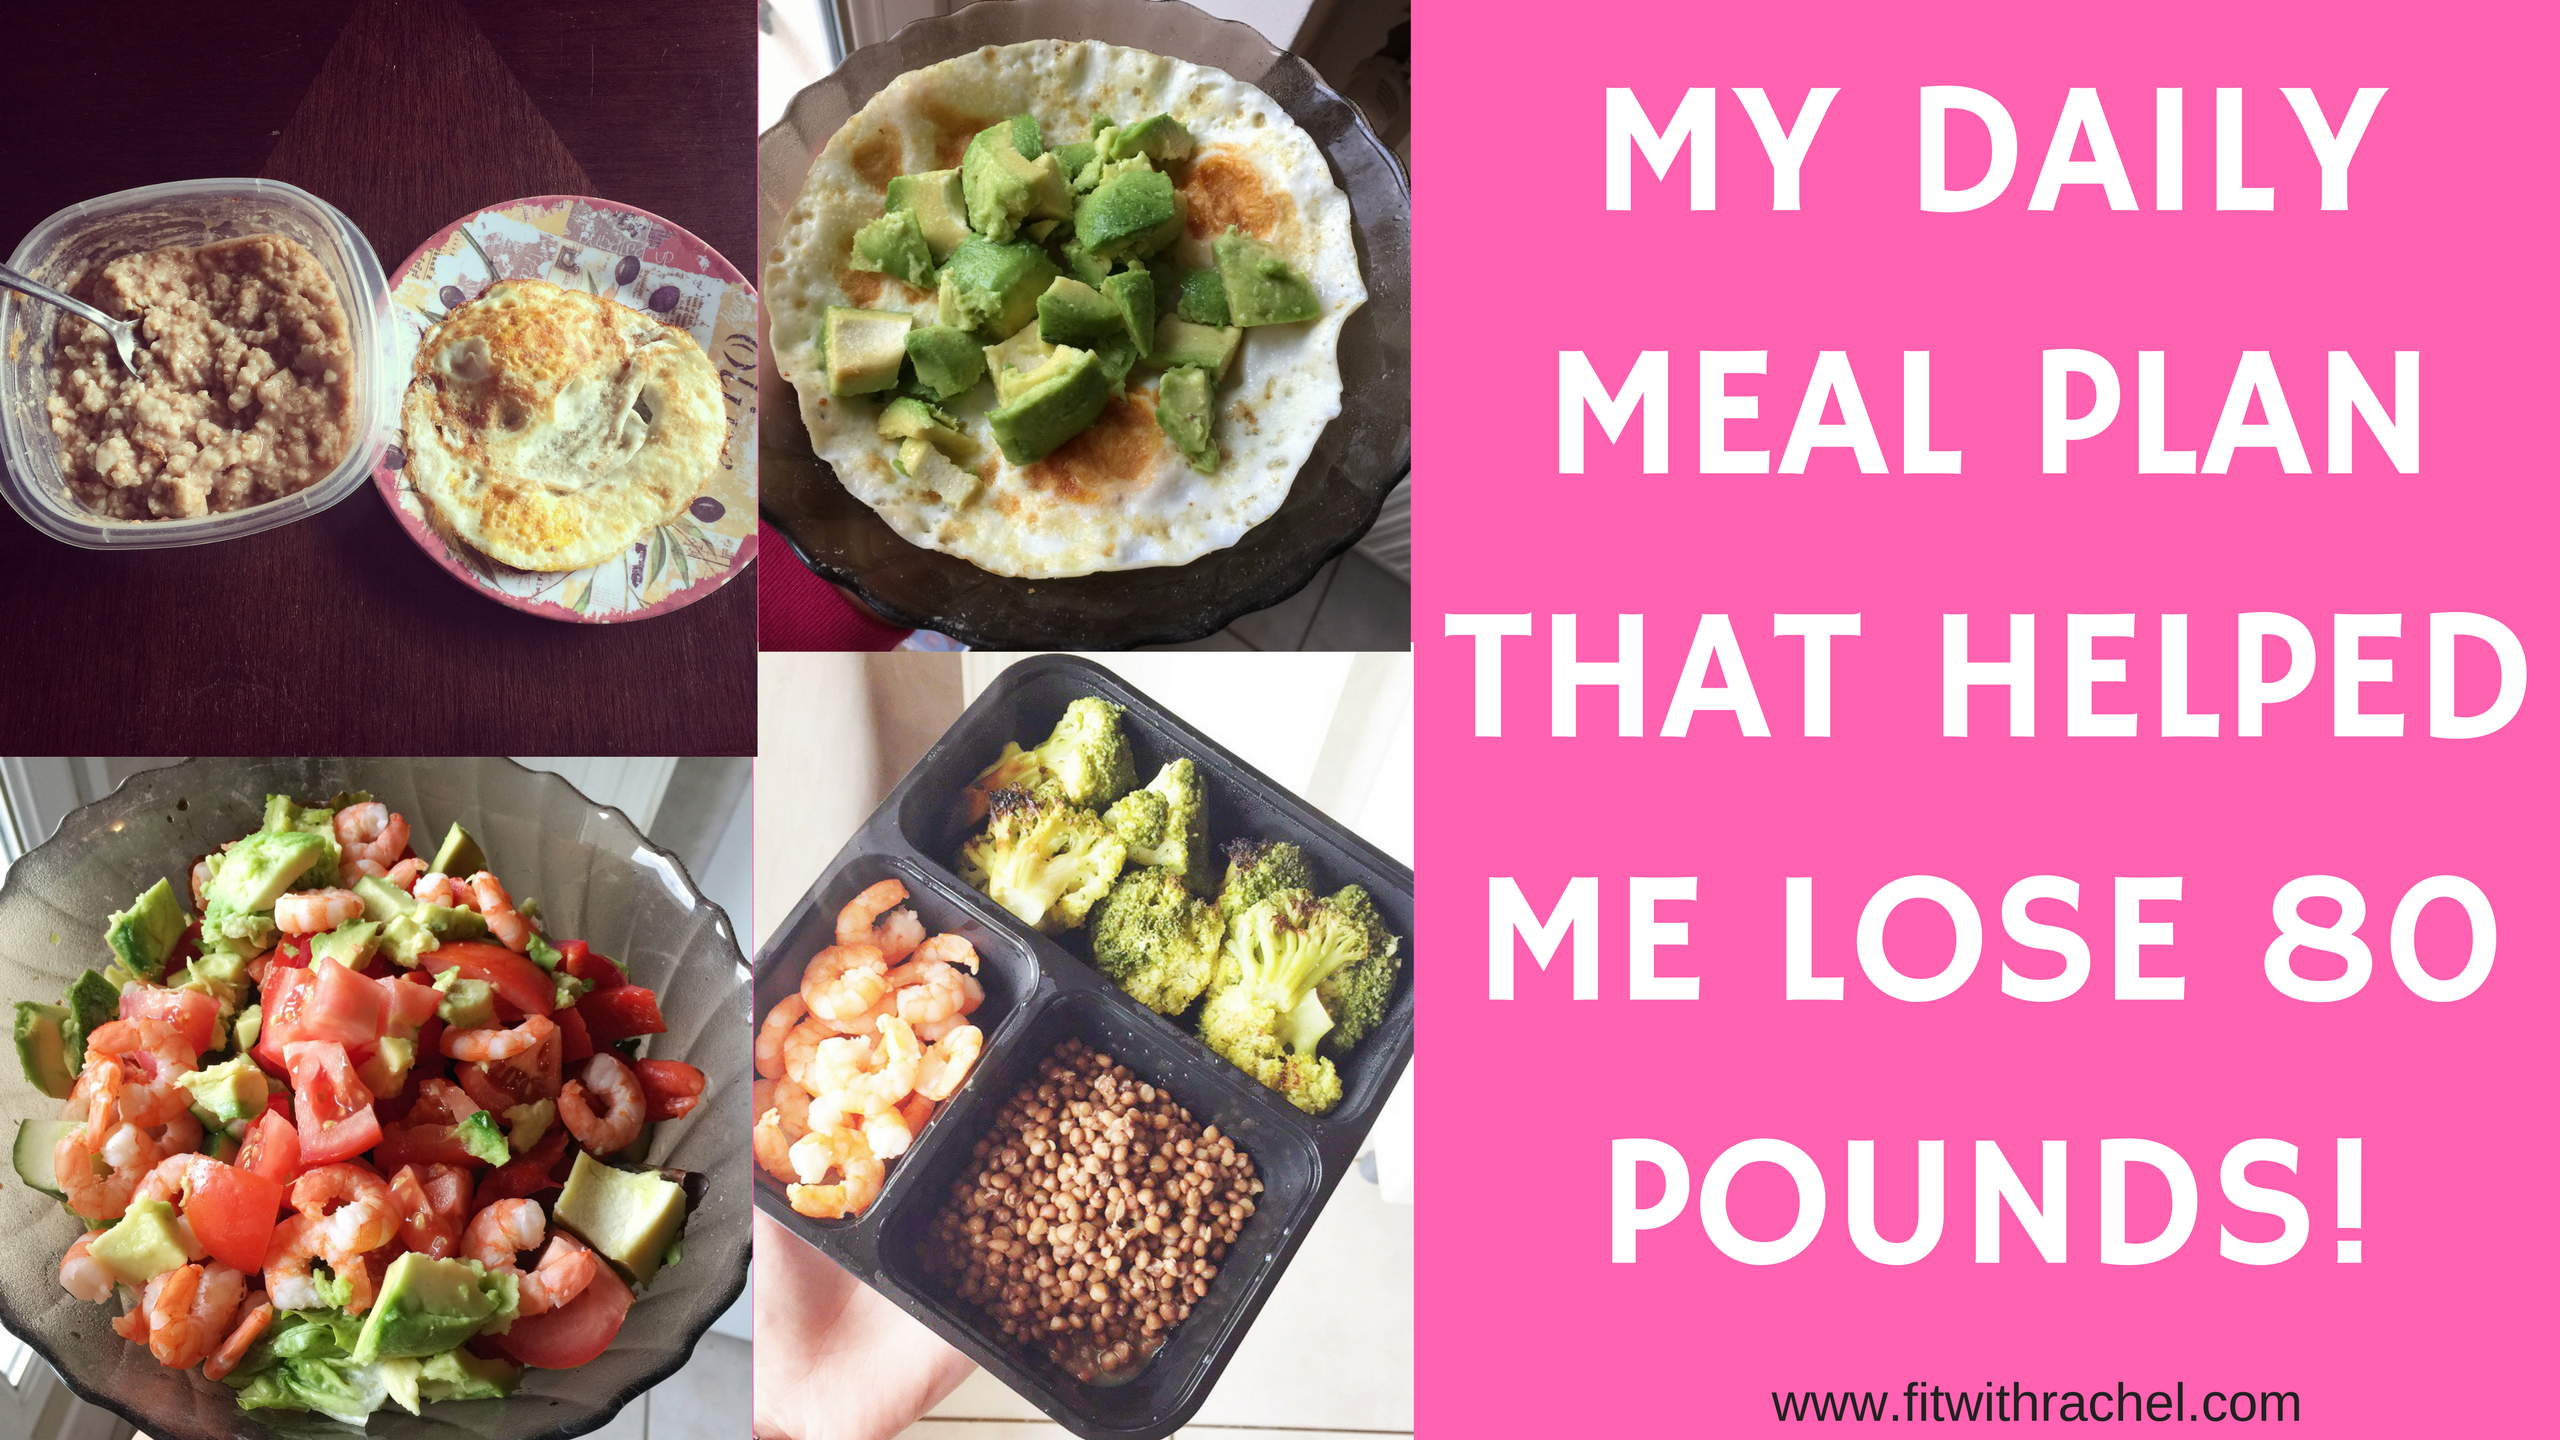 My Daily Meal Plan (Best Foods to Eat for Weight Loss!)